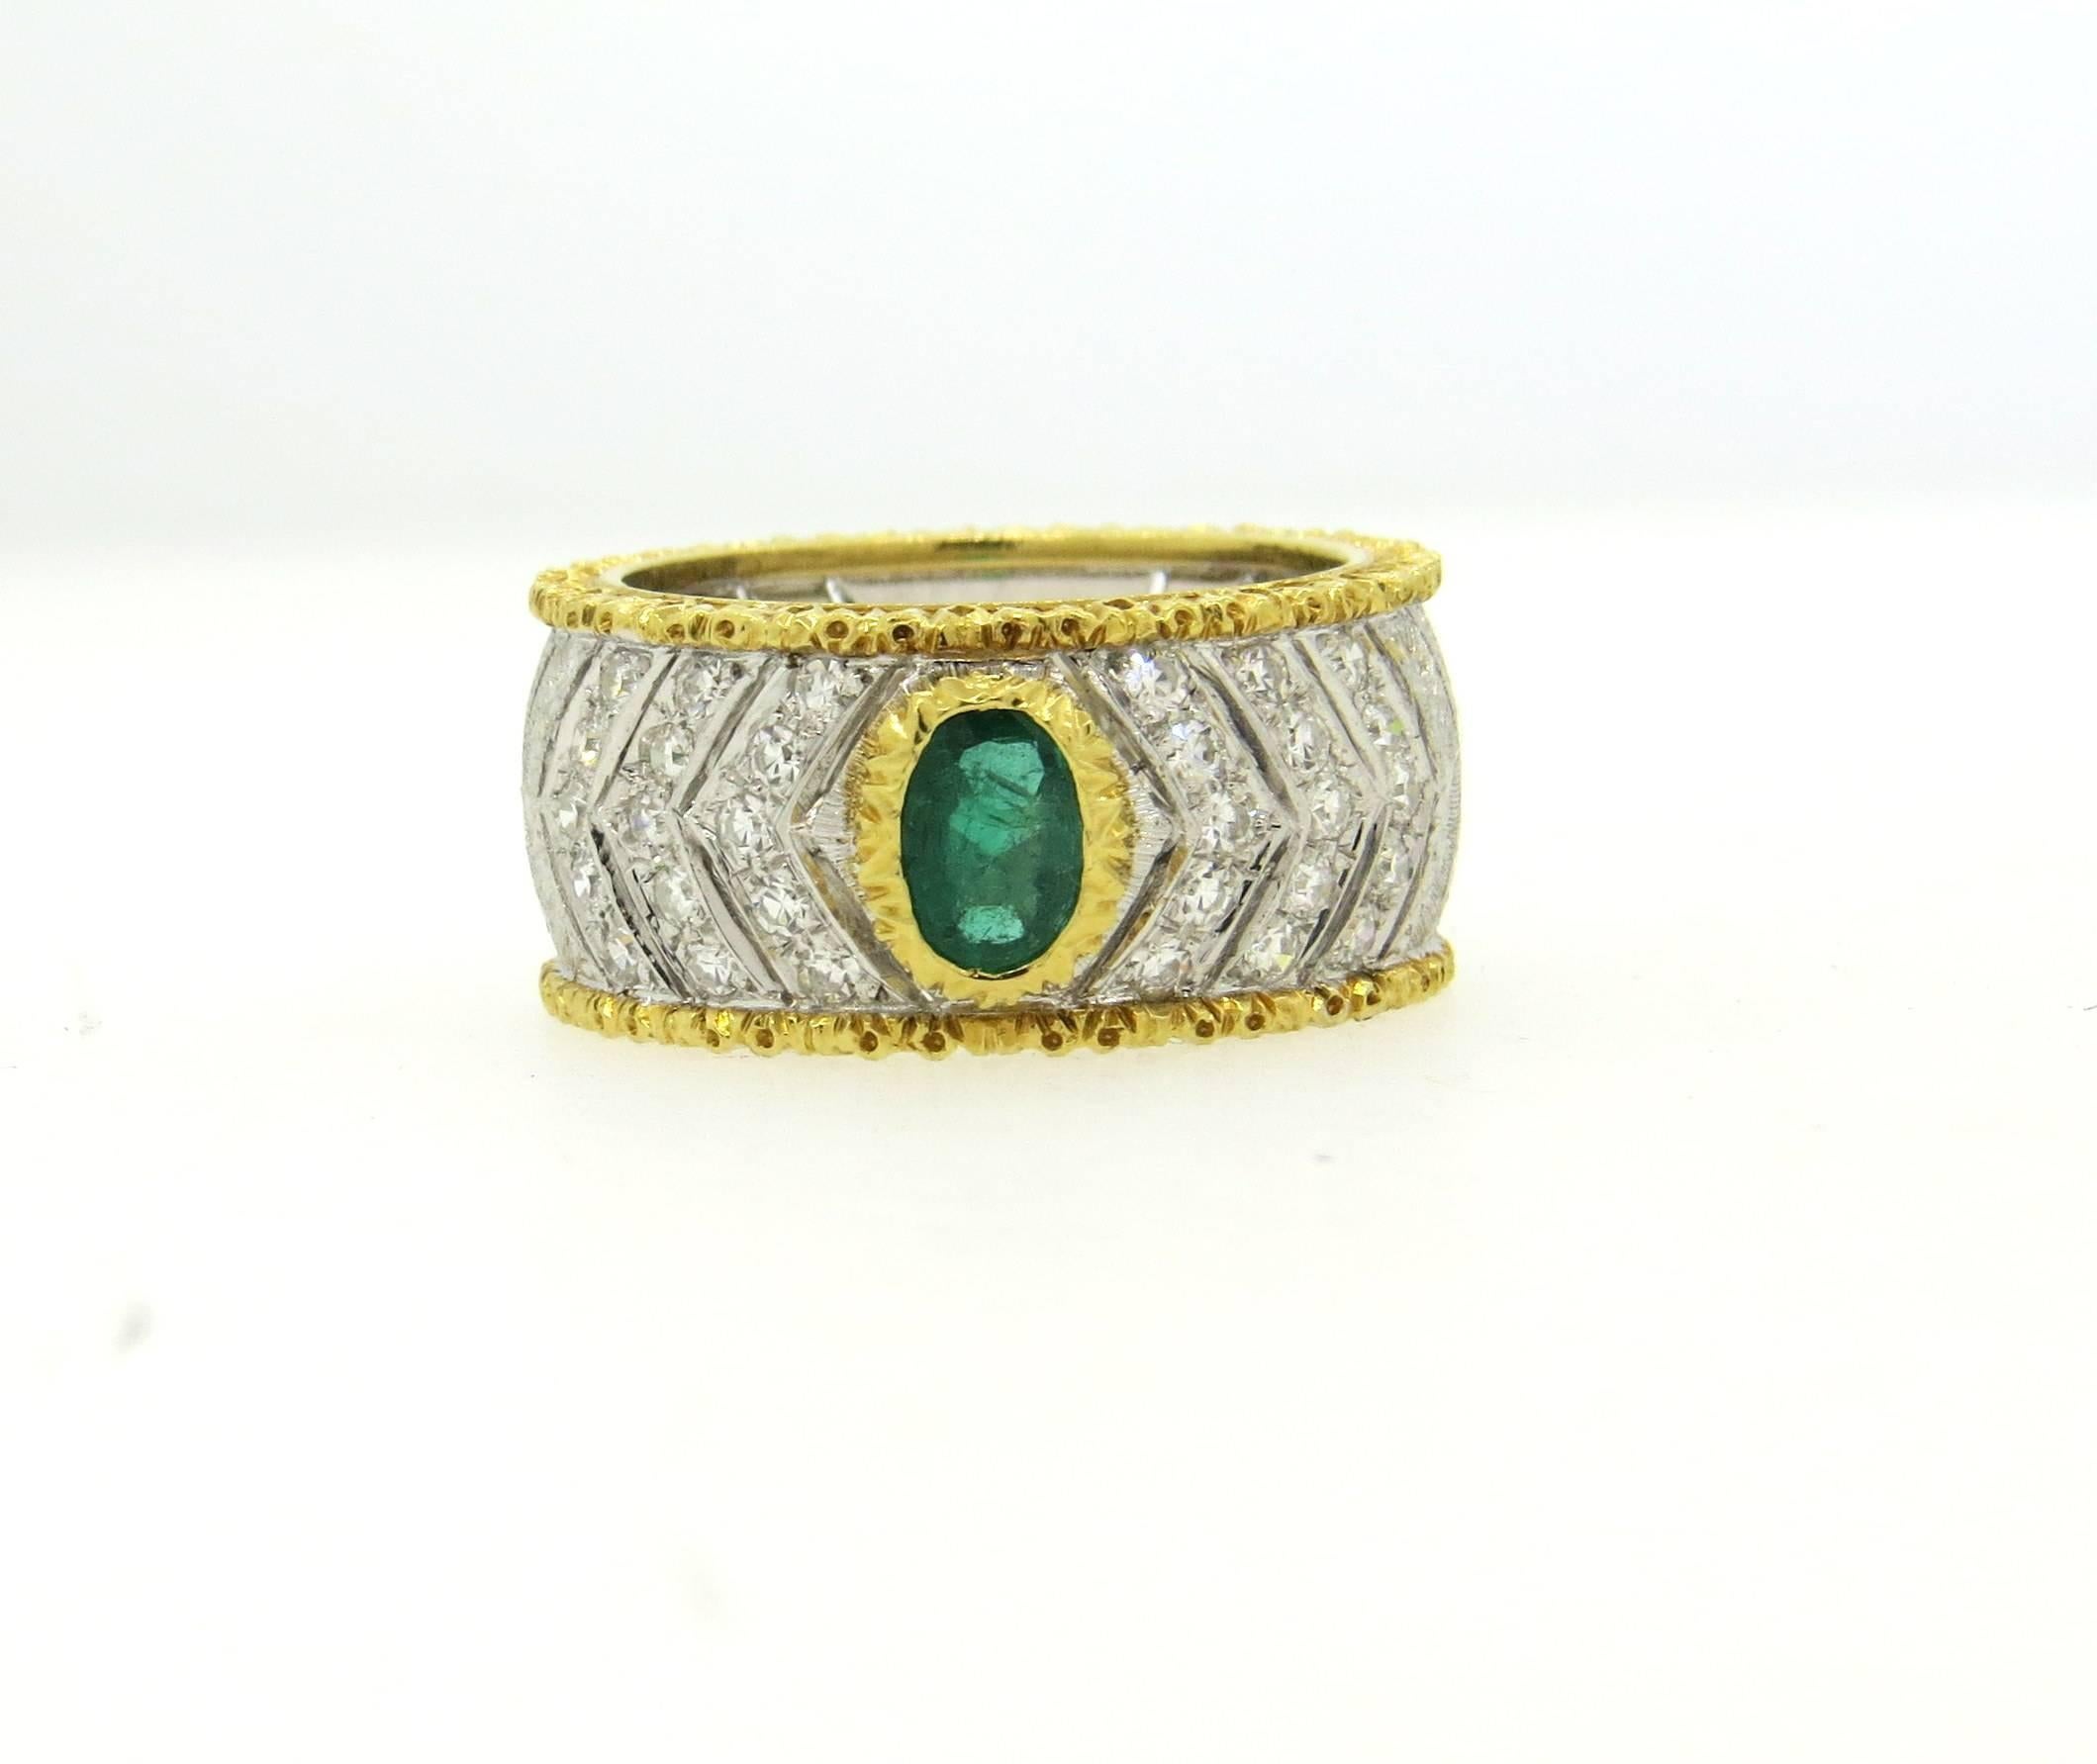 Beautiful 18k white and yellow gold band ring, crafted by Mario Buccellati, decorated with a 0.60ct emerald and approx. 0.35ctw in G/VS diamonds. Ring is a size 6 and is 10mm wide. Marked M. Buccellati. Weight of the piece - 8.9 grams
